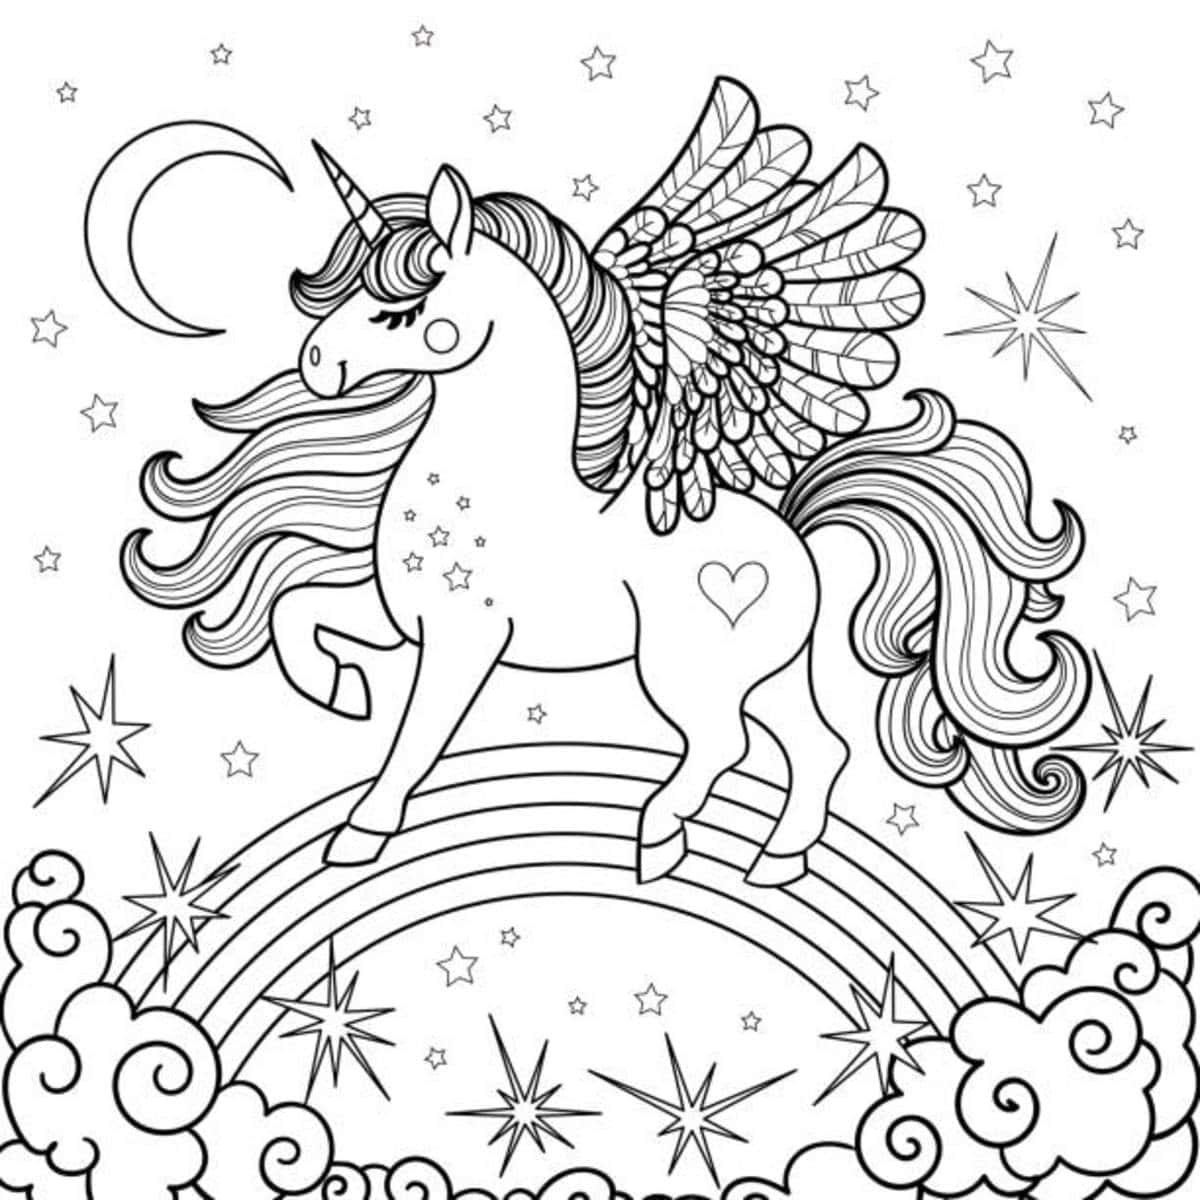 Walking On Rainbow Unicorn Coloring Picture